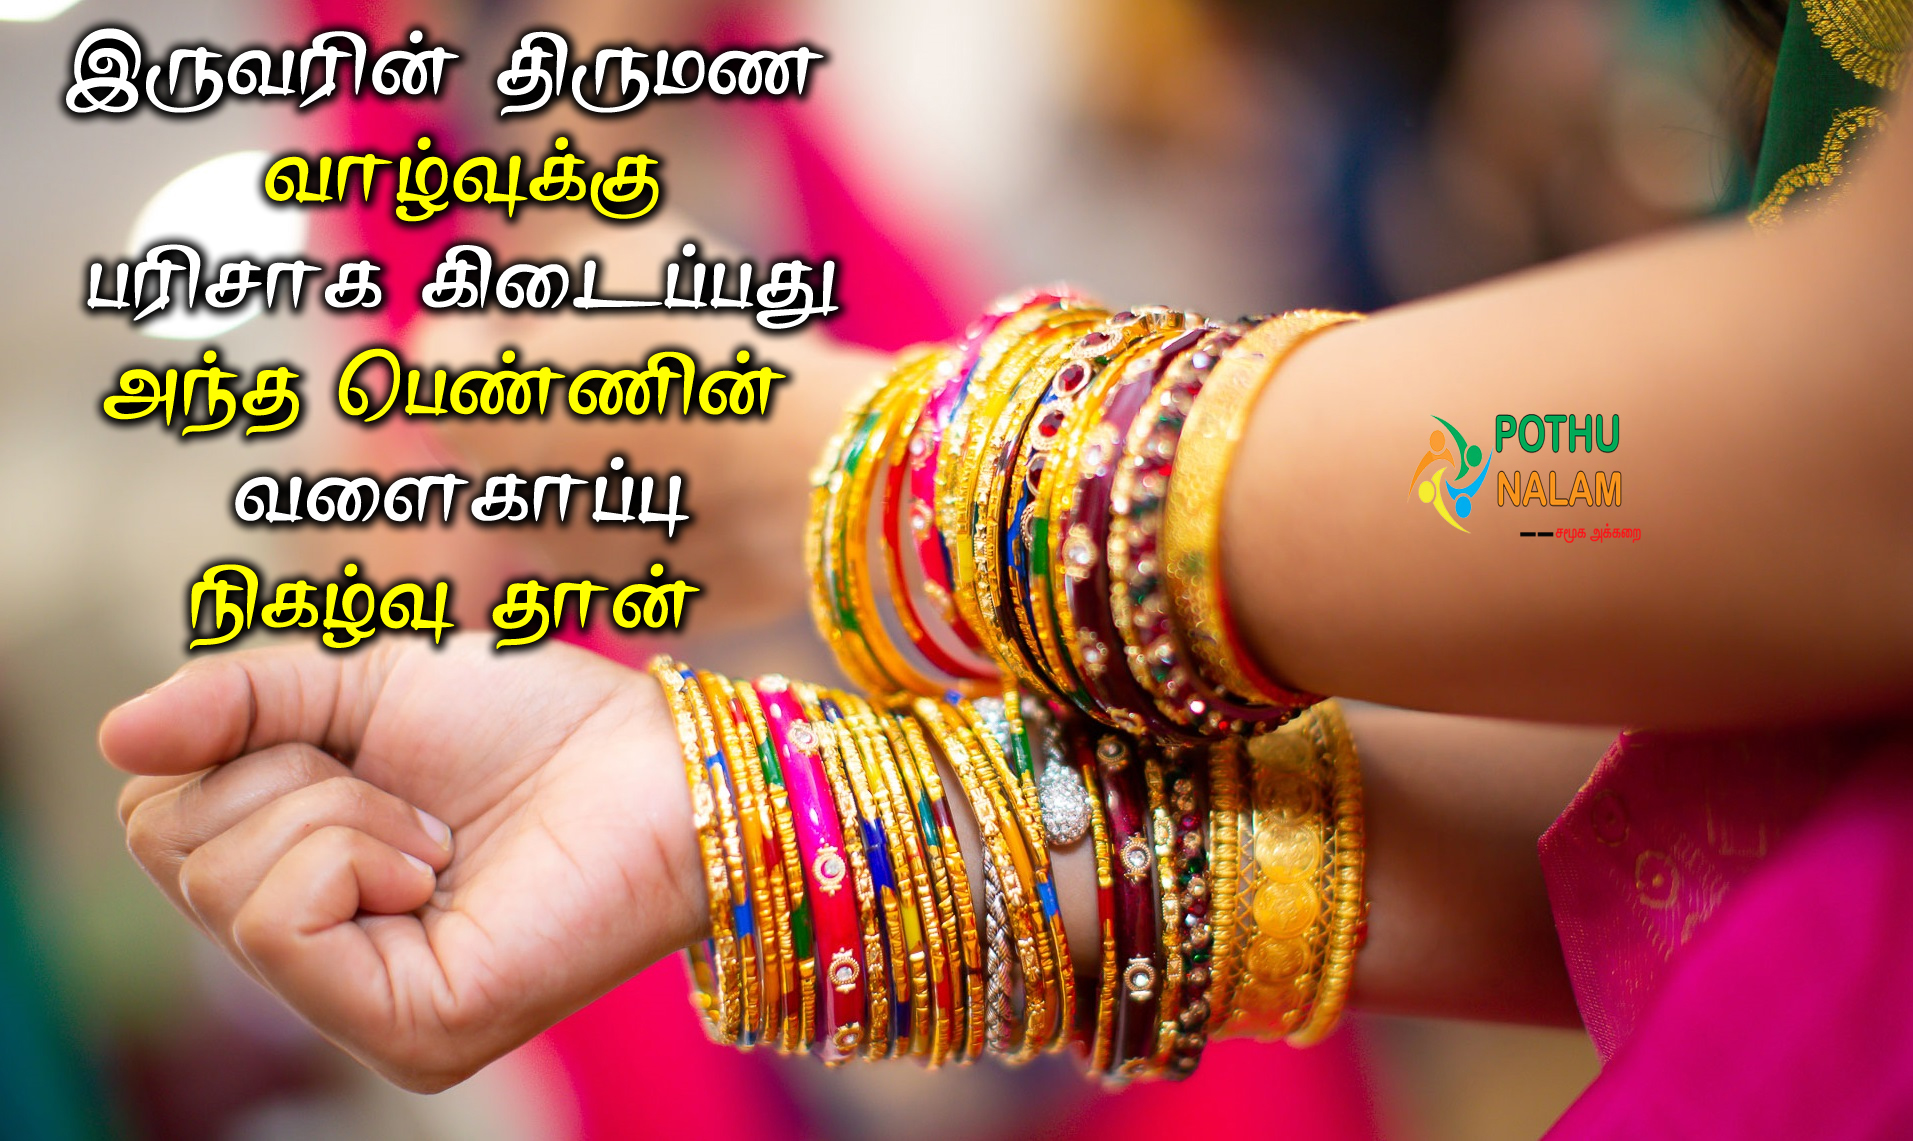 Valaikappu Wishes in Tamil